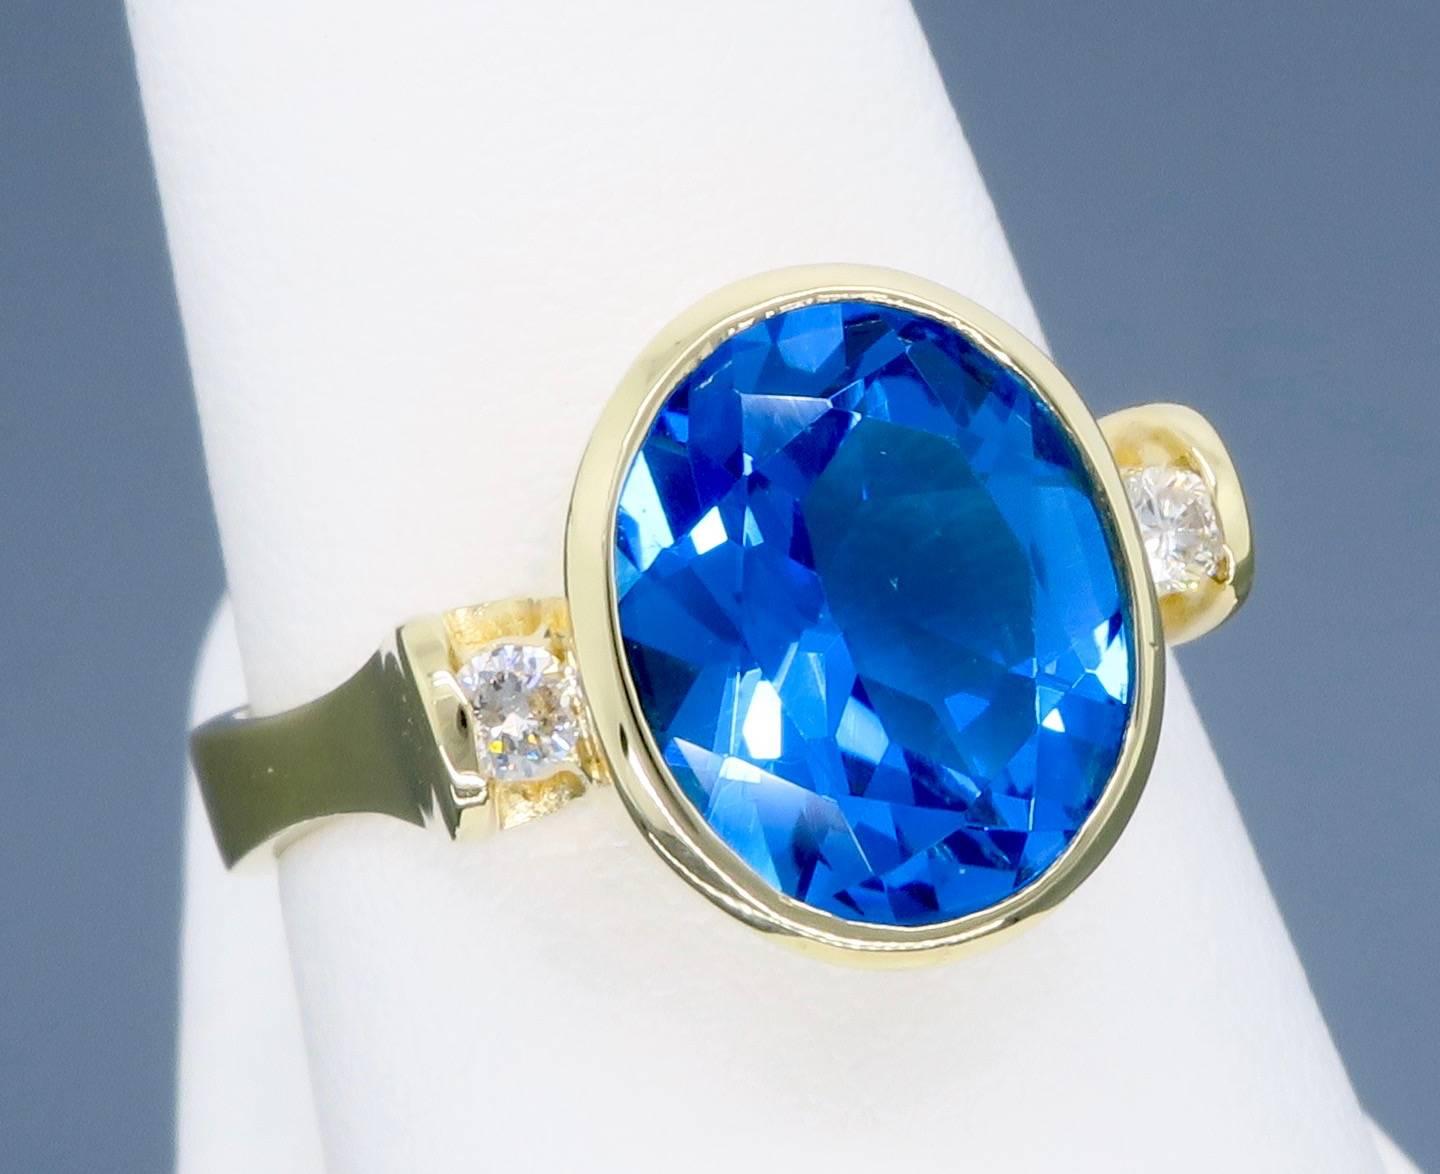 This gorgeous ring features a bezel set large oval cut blue topaz with deep blue color. The featured gemstone is approximately 10.58MM X 8.79 MM X 5.70MM, and is accented by two beautiful Round Brilliant Cut Diamonds. There is approximately .10CTW